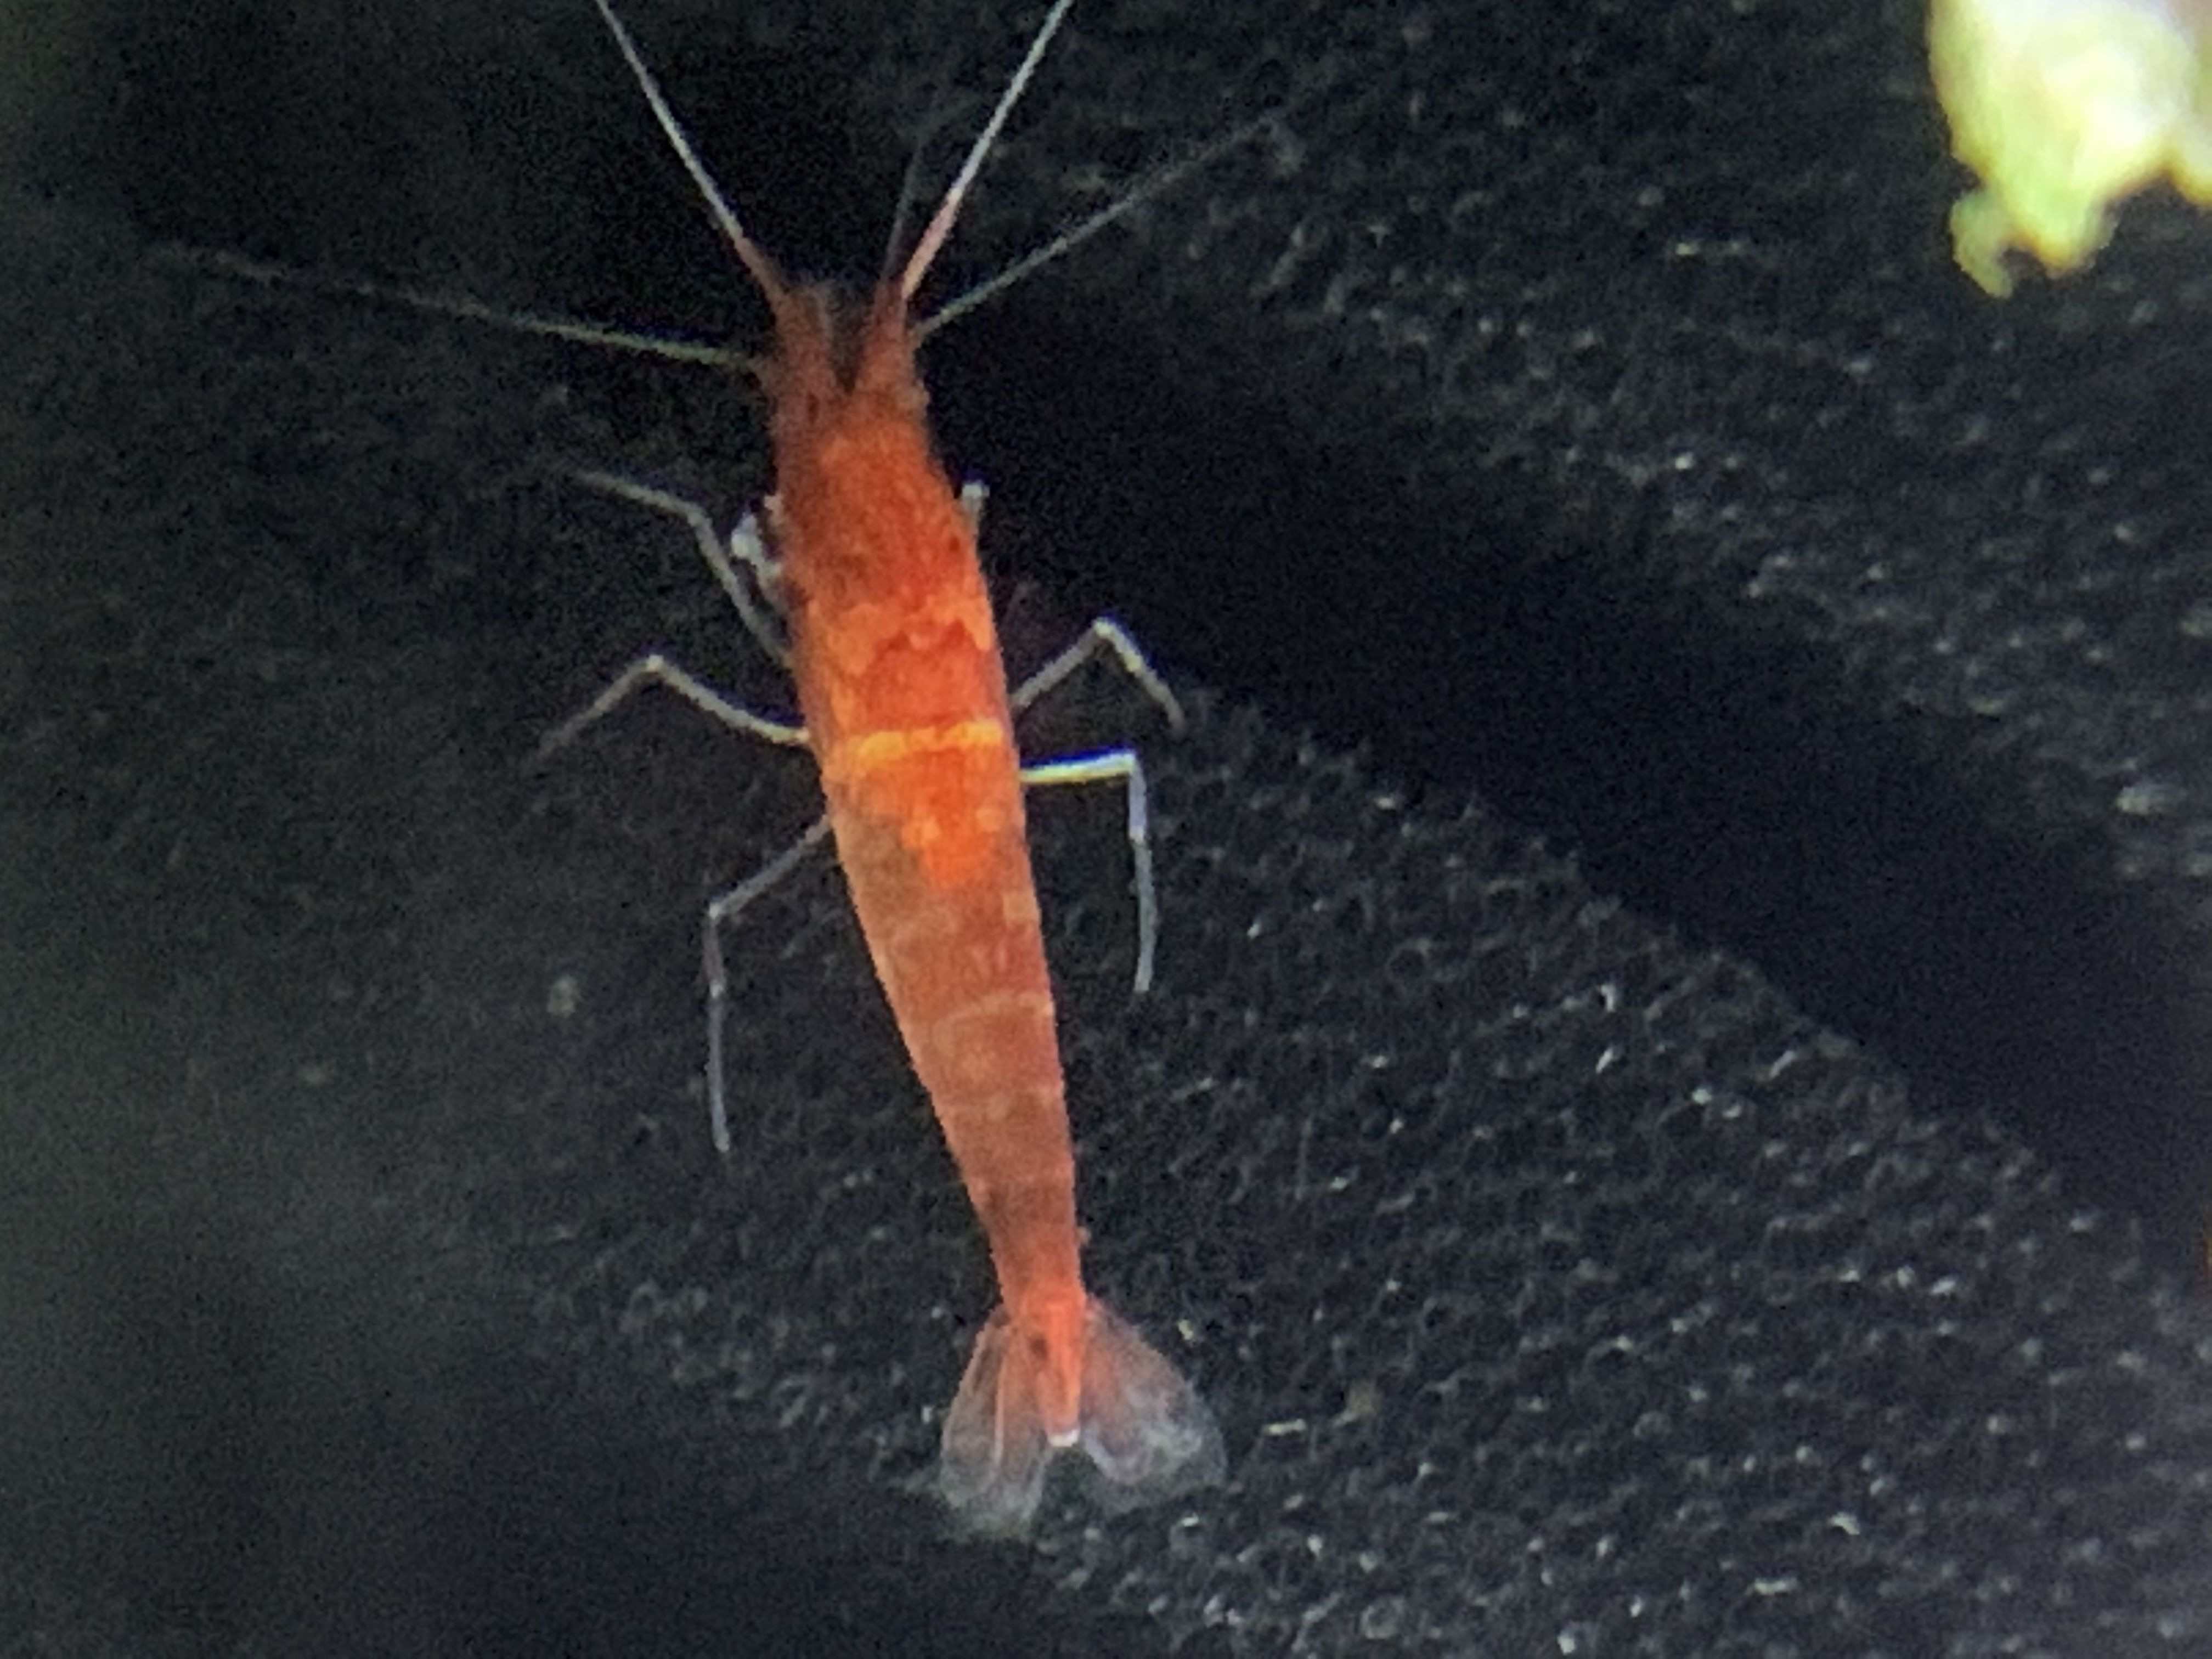 Shrimp in tank with expected coloration